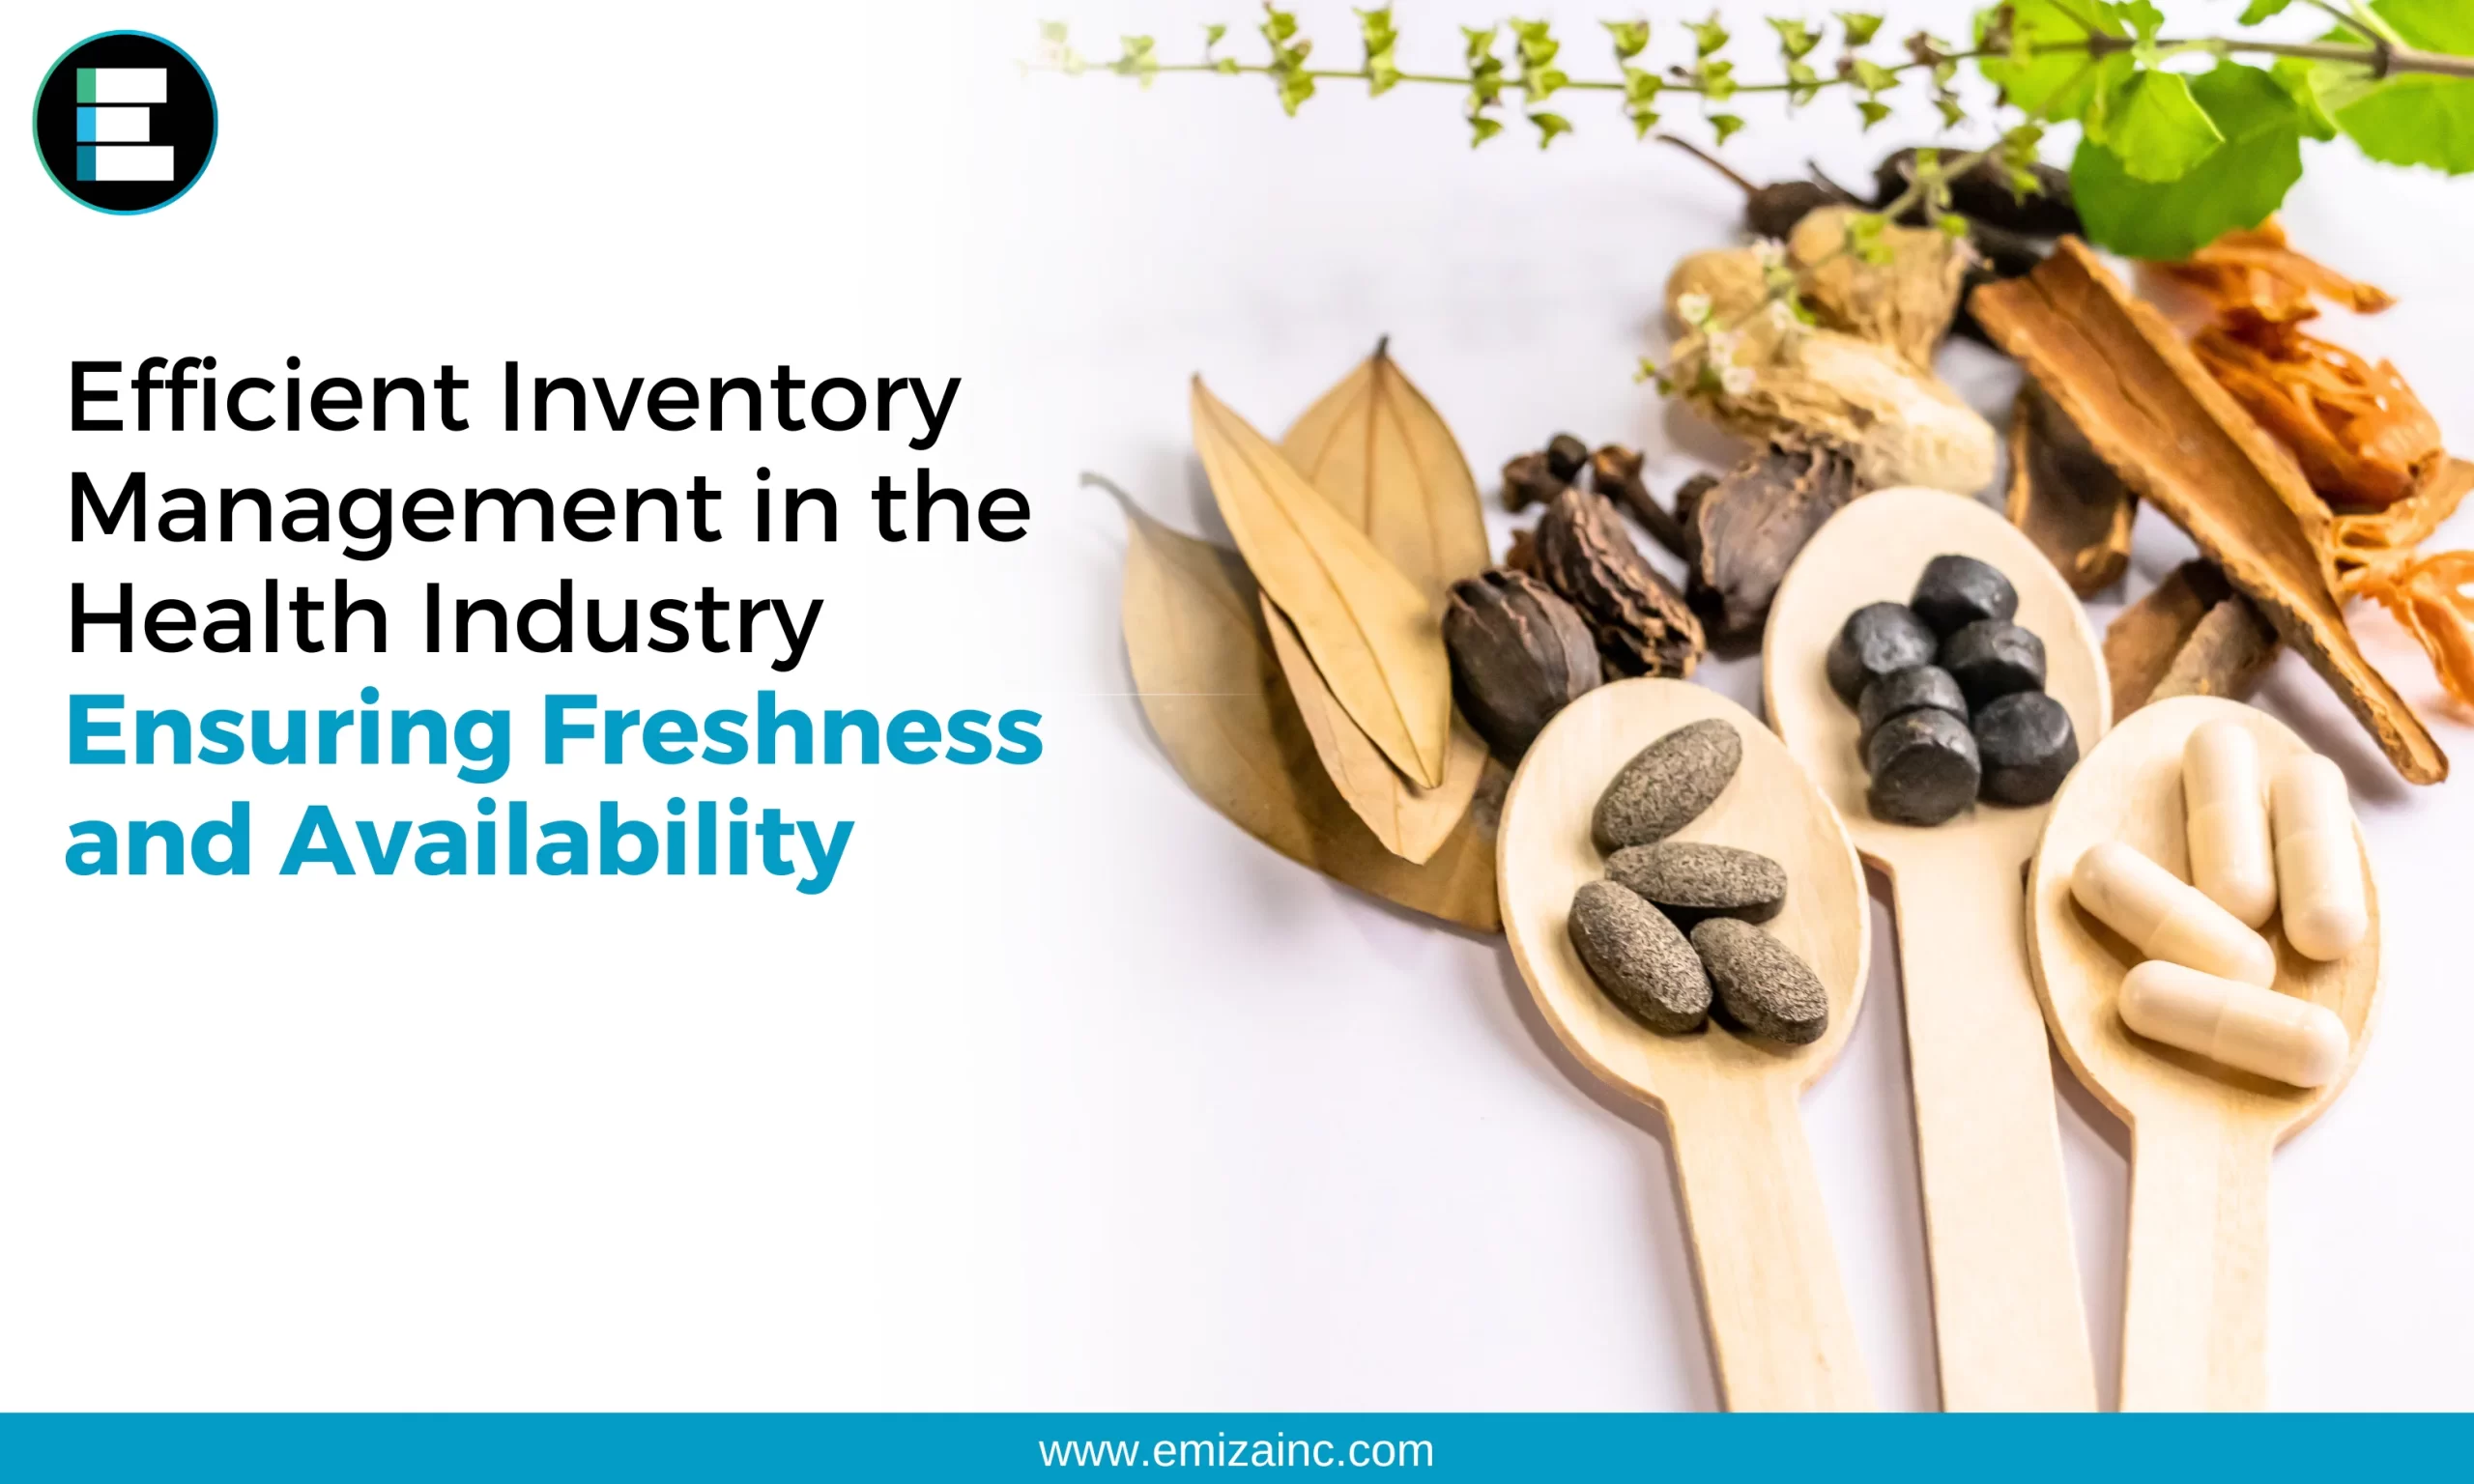 Efficient Inventory Management in the Health Industry: Ensuring Freshness and Availability